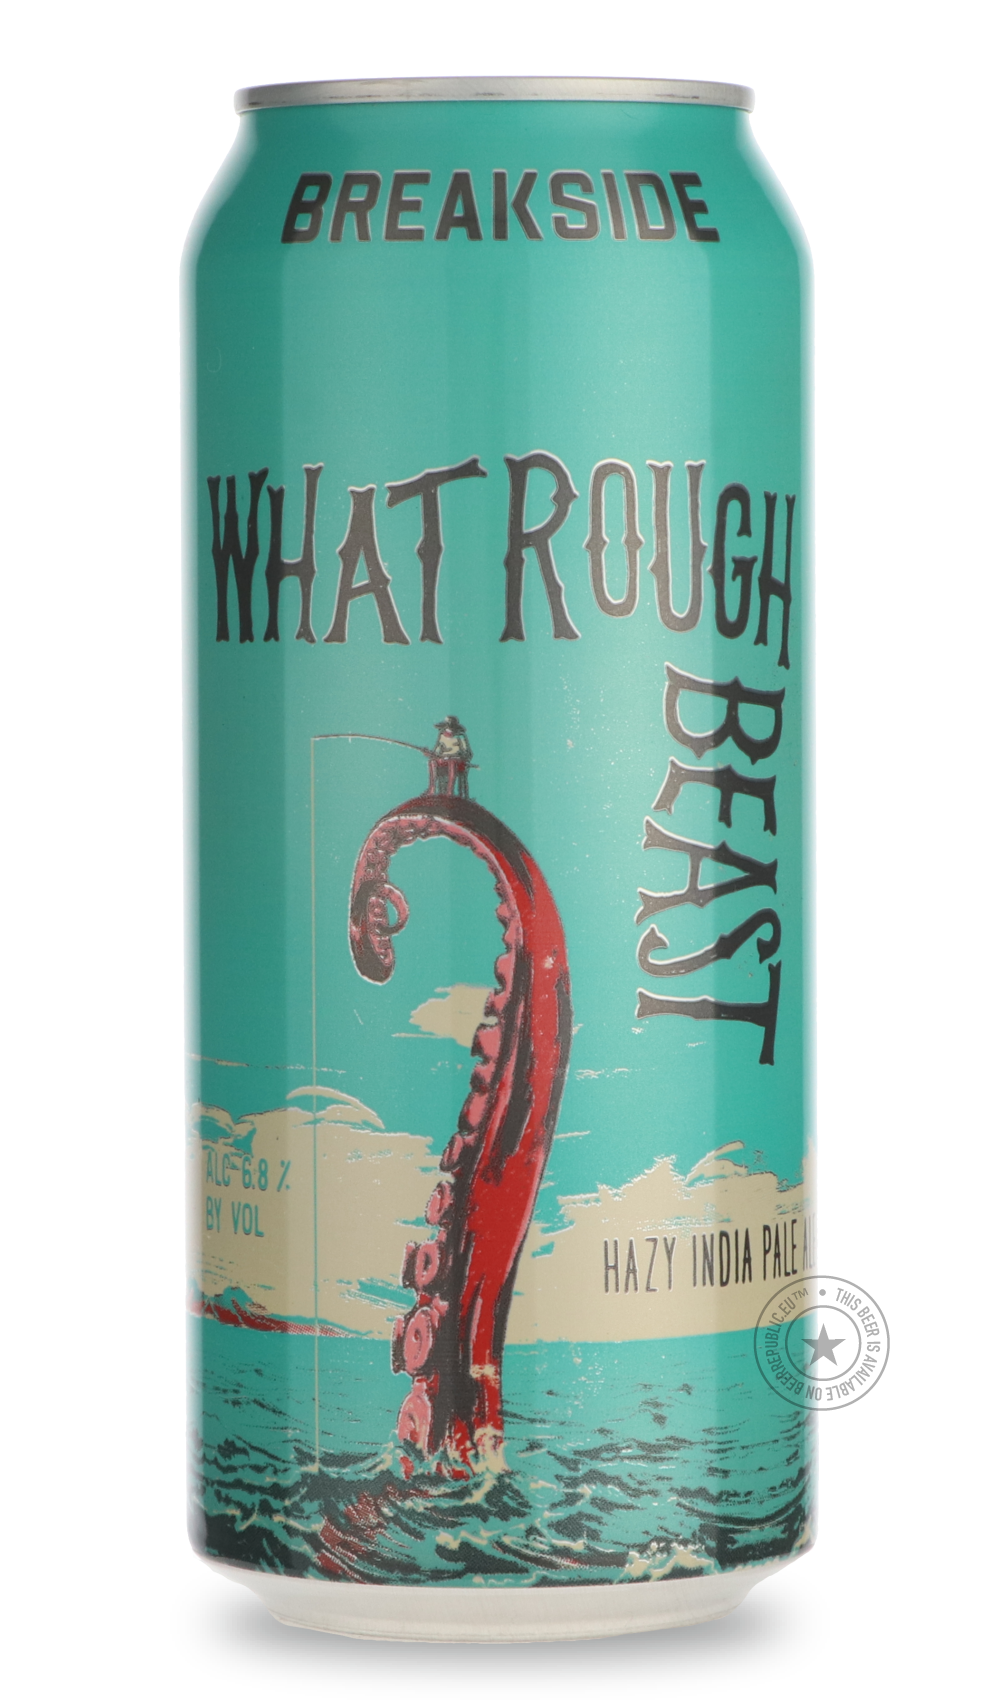 -Breakside- What Rough Beast-IPA- Only @ Beer Republic - The best online beer store for American & Canadian craft beer - Buy beer online from the USA and Canada - Bier online kopen - Amerikaans bier kopen - Craft beer store - Craft beer kopen - Amerikanisch bier kaufen - Bier online kaufen - Acheter biere online - IPA - Stout - Porter - New England IPA - Hazy IPA - Imperial Stout - Barrel Aged - Barrel Aged Imperial Stout - Brown - Dark beer - Blond - Blonde - Pilsner - Lager - Wheat - Weizen - Amber - Barl